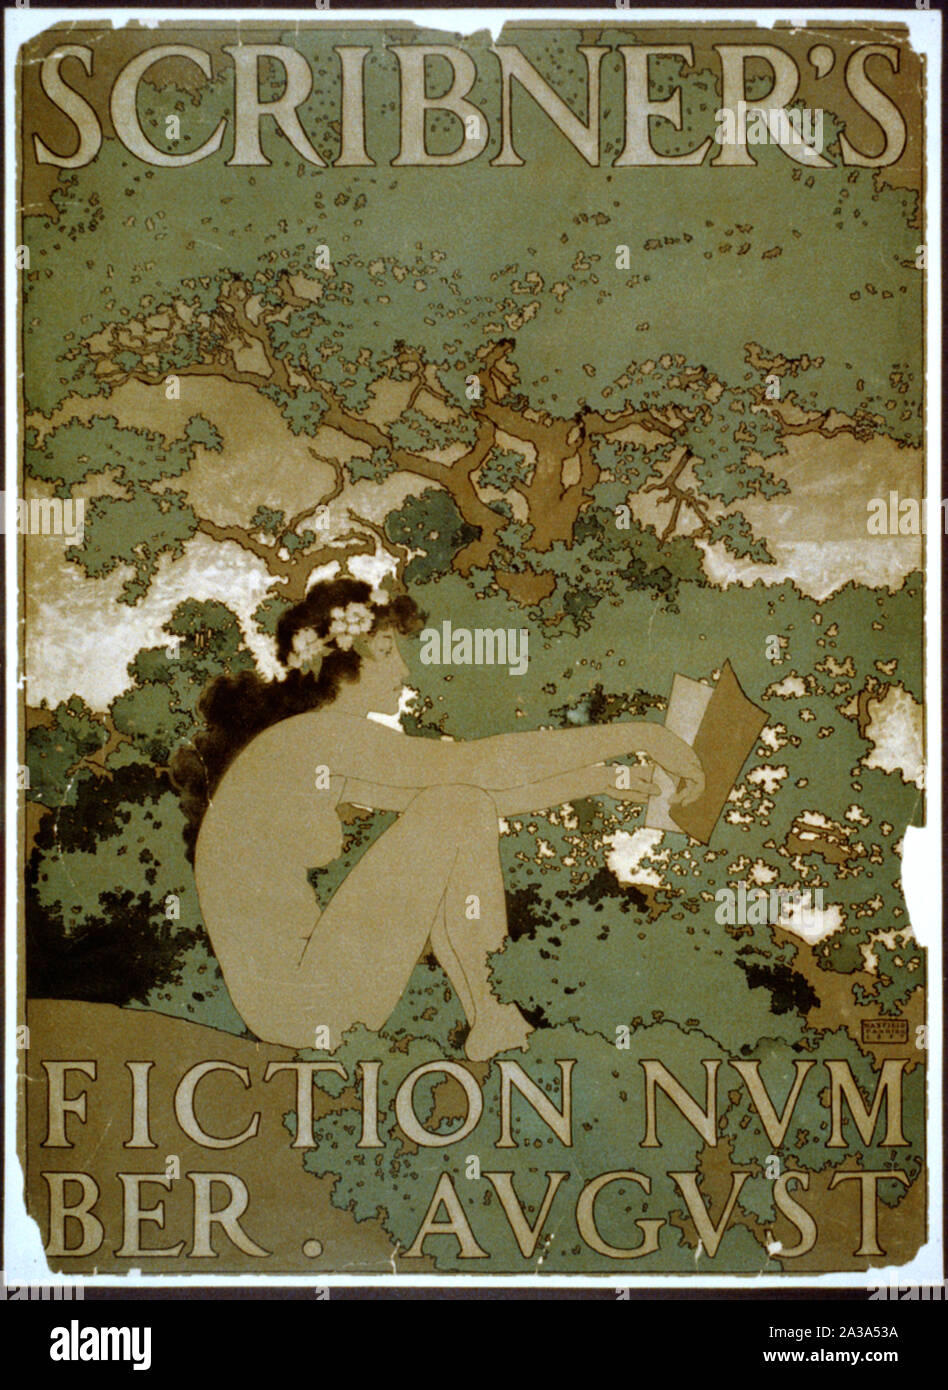 Scribner's fiction number, August / Maxfield Parrish 1897. Stock Photo